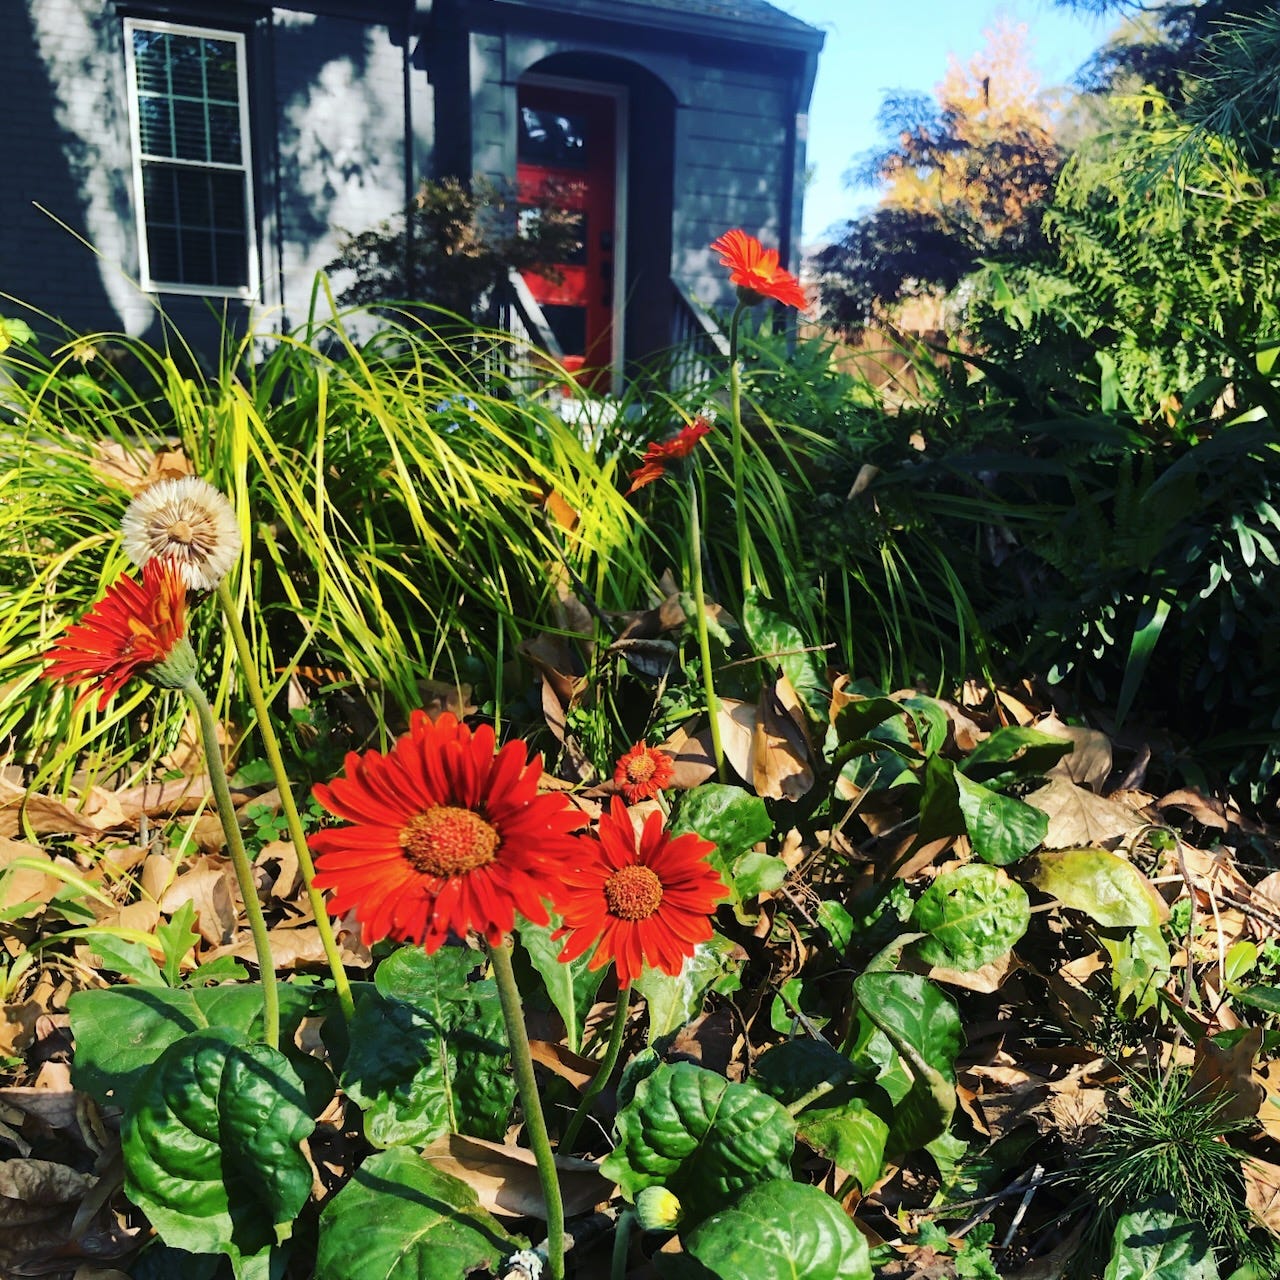 Red blooms in front of a blue-grey house